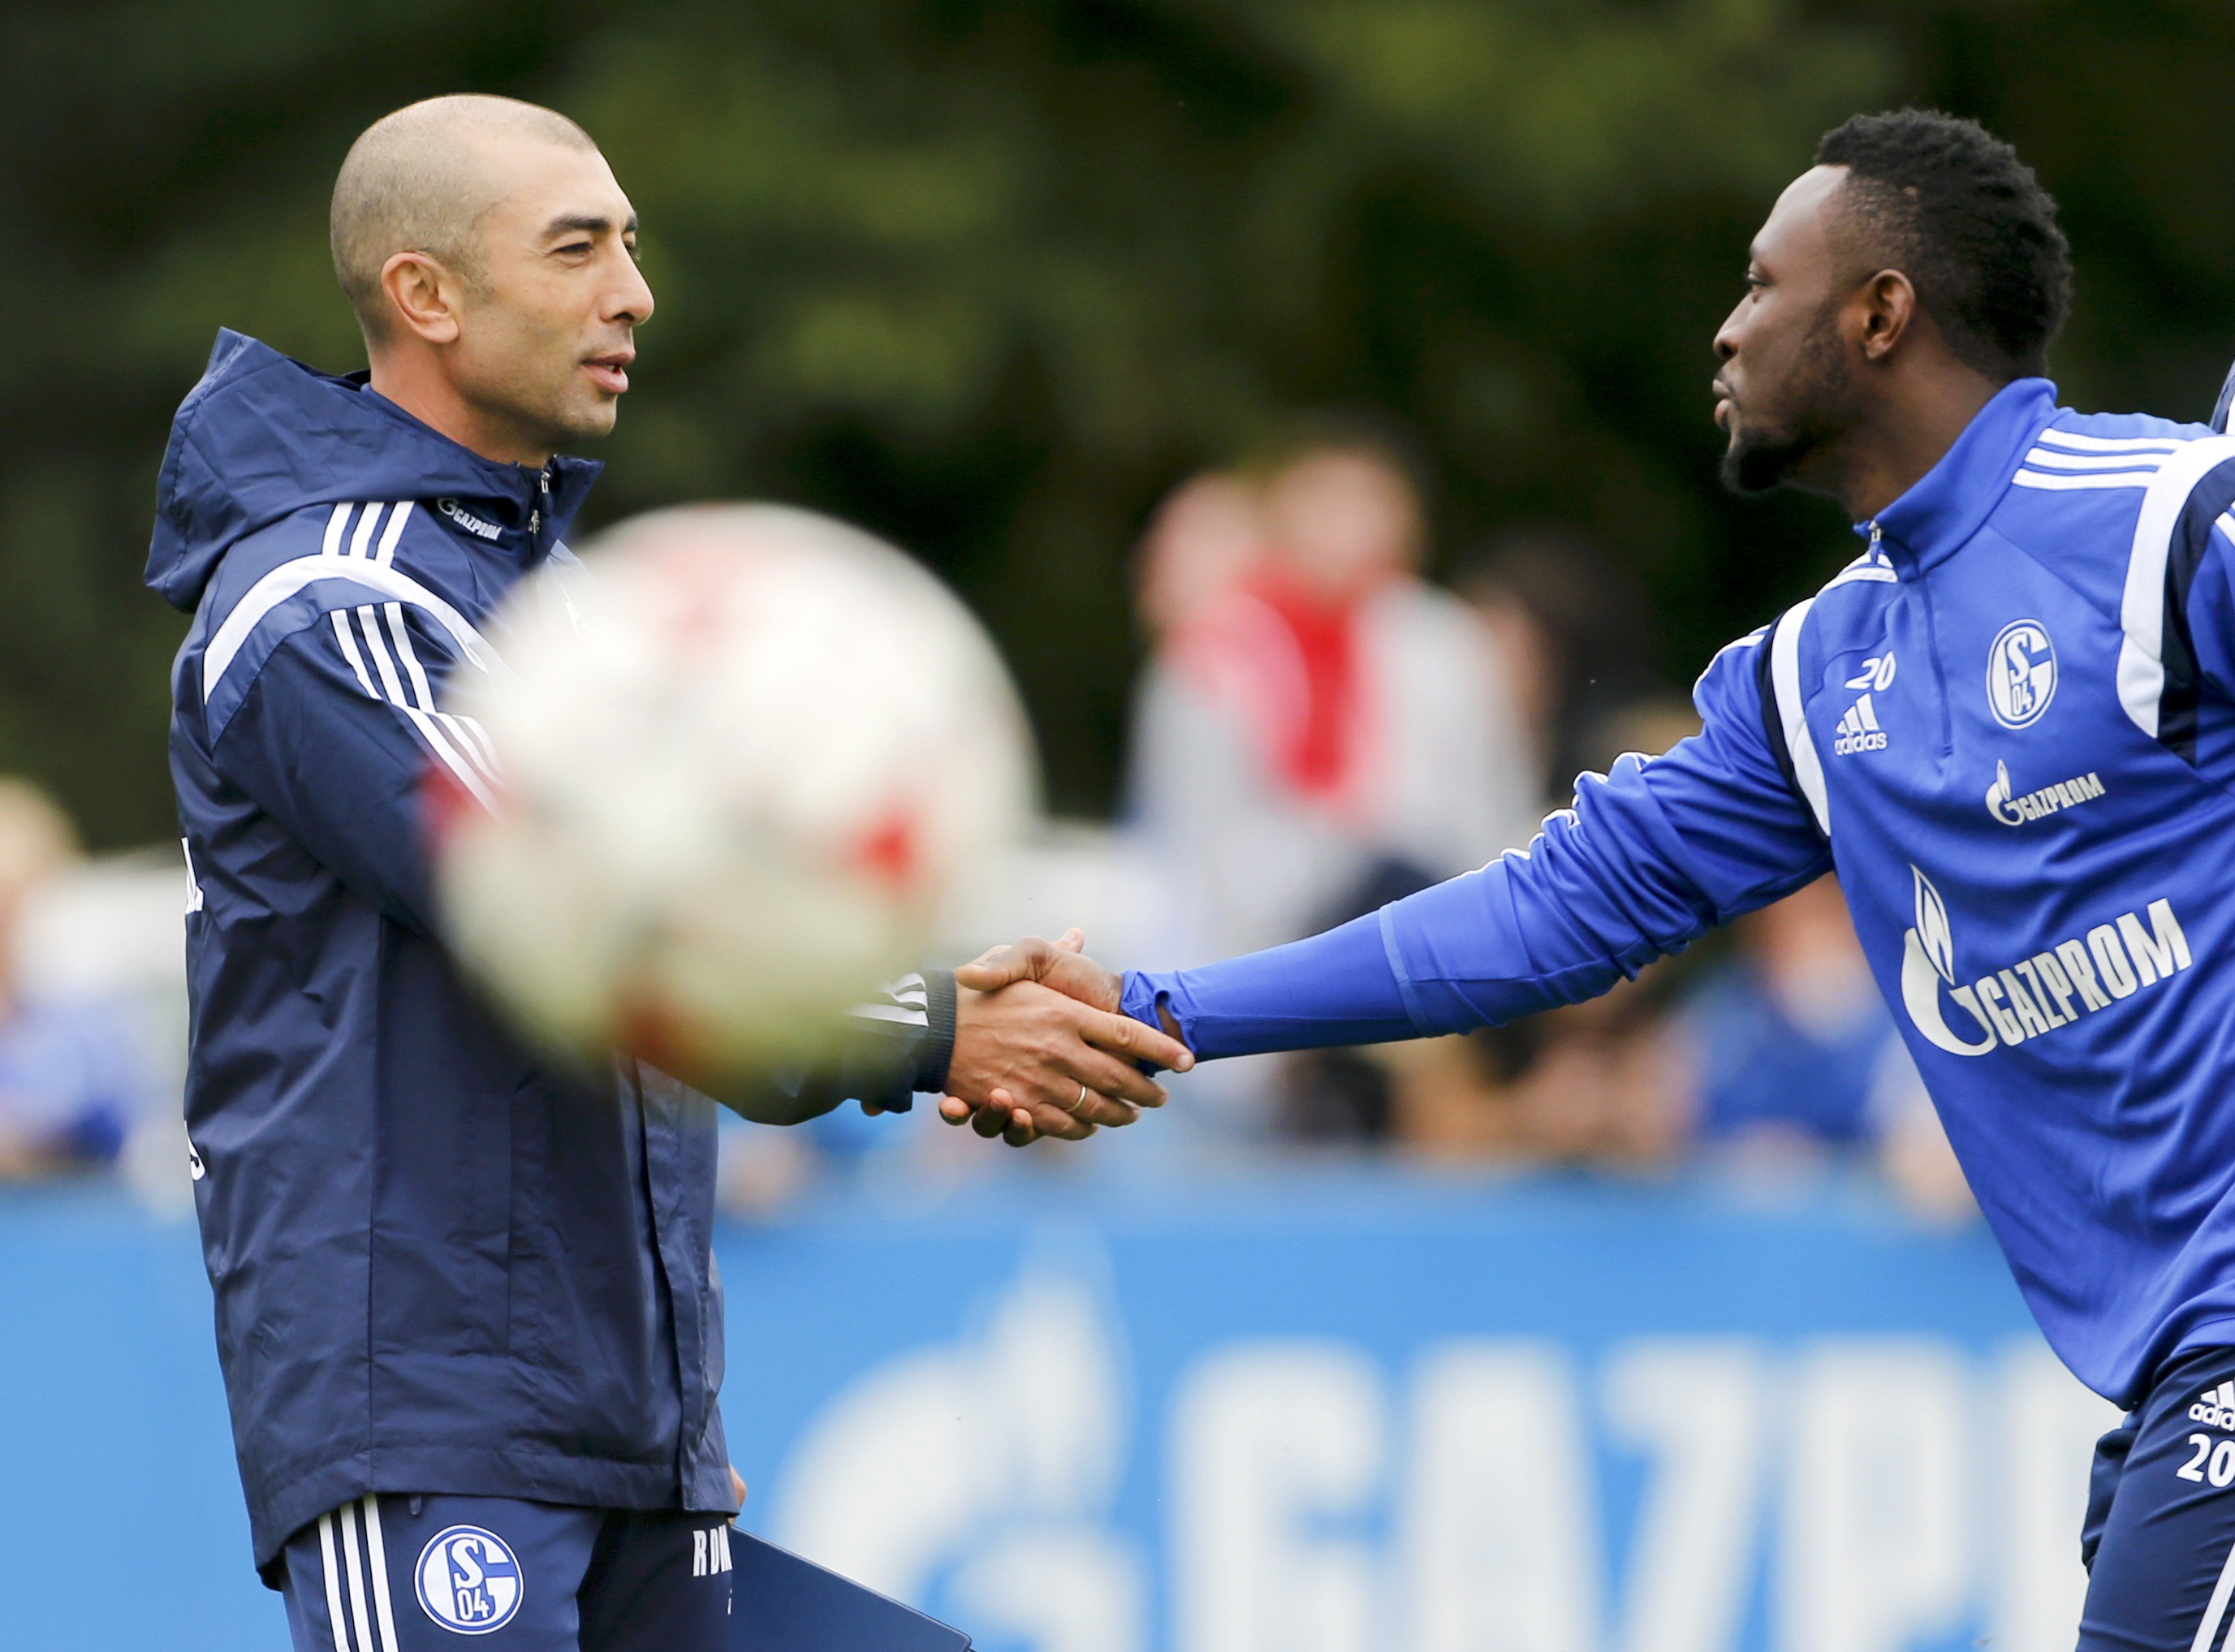 Schalke 04's new coach Roberto Di Matteo shakes hands with player Chinedu Obasi (R) during his first training session as Schalke 04's head coach in Gelsenkirchen September 30, 2014. Schalke 04 appointed Di Matteo, former coach of the 2012 Champions League winner FC Chelsea, as a replacement for Jens Keller, who was sacked on Tuesday after an inconsistent start to the season. REUTERS/Wolfgang Rattay (GERMANY - Tags: SOCCER SPORT)